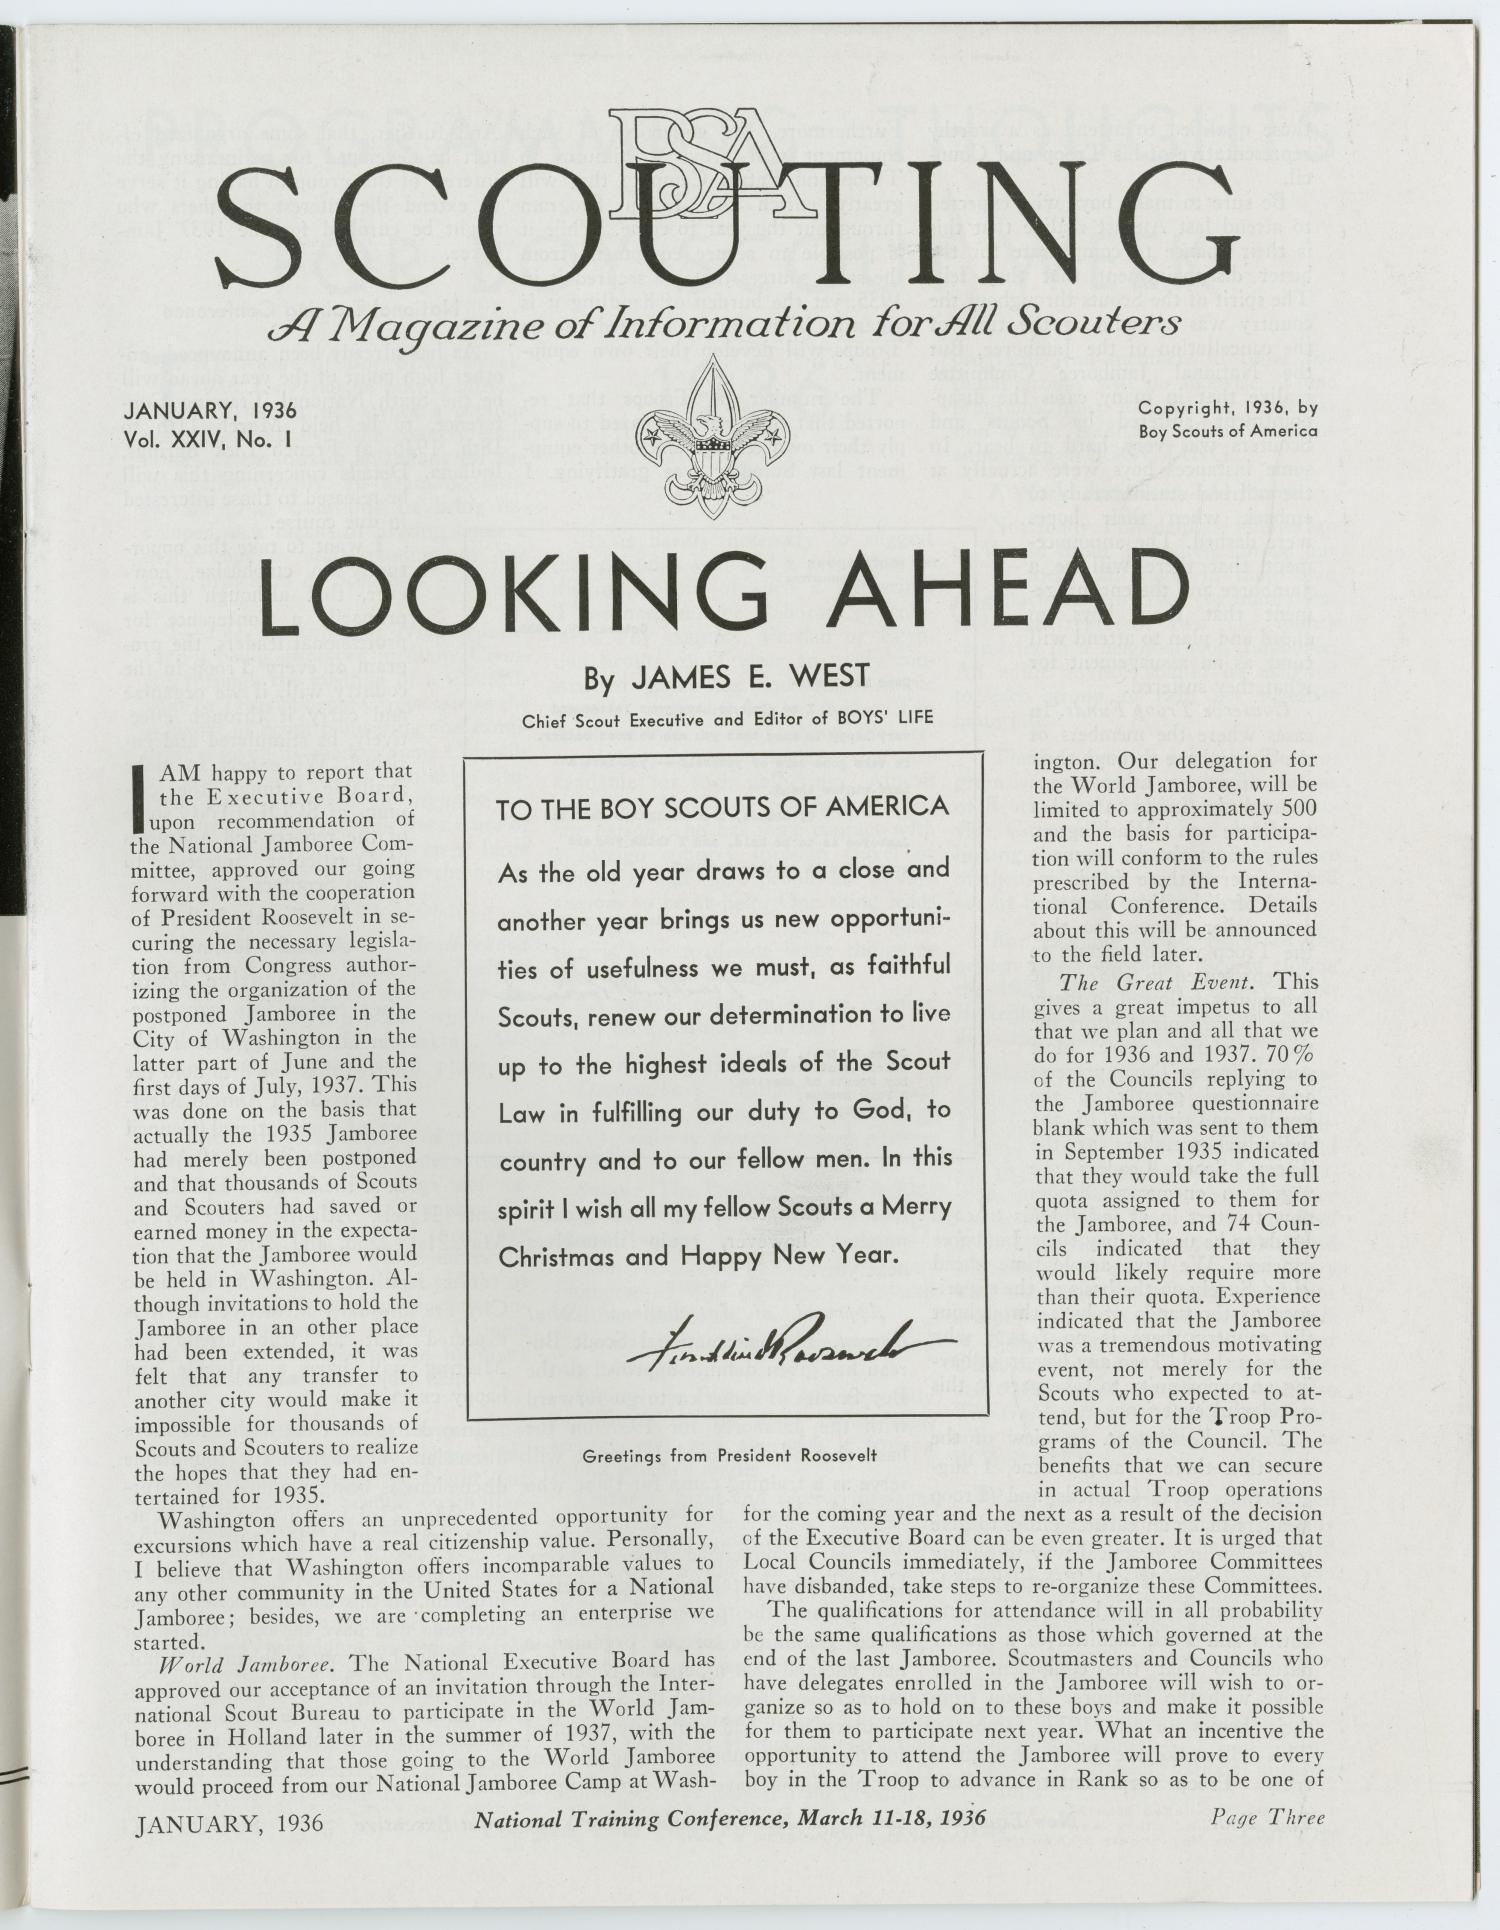 Scouting, Volume 24, Number 1, January 1936
                                                
                                                    3
                                                